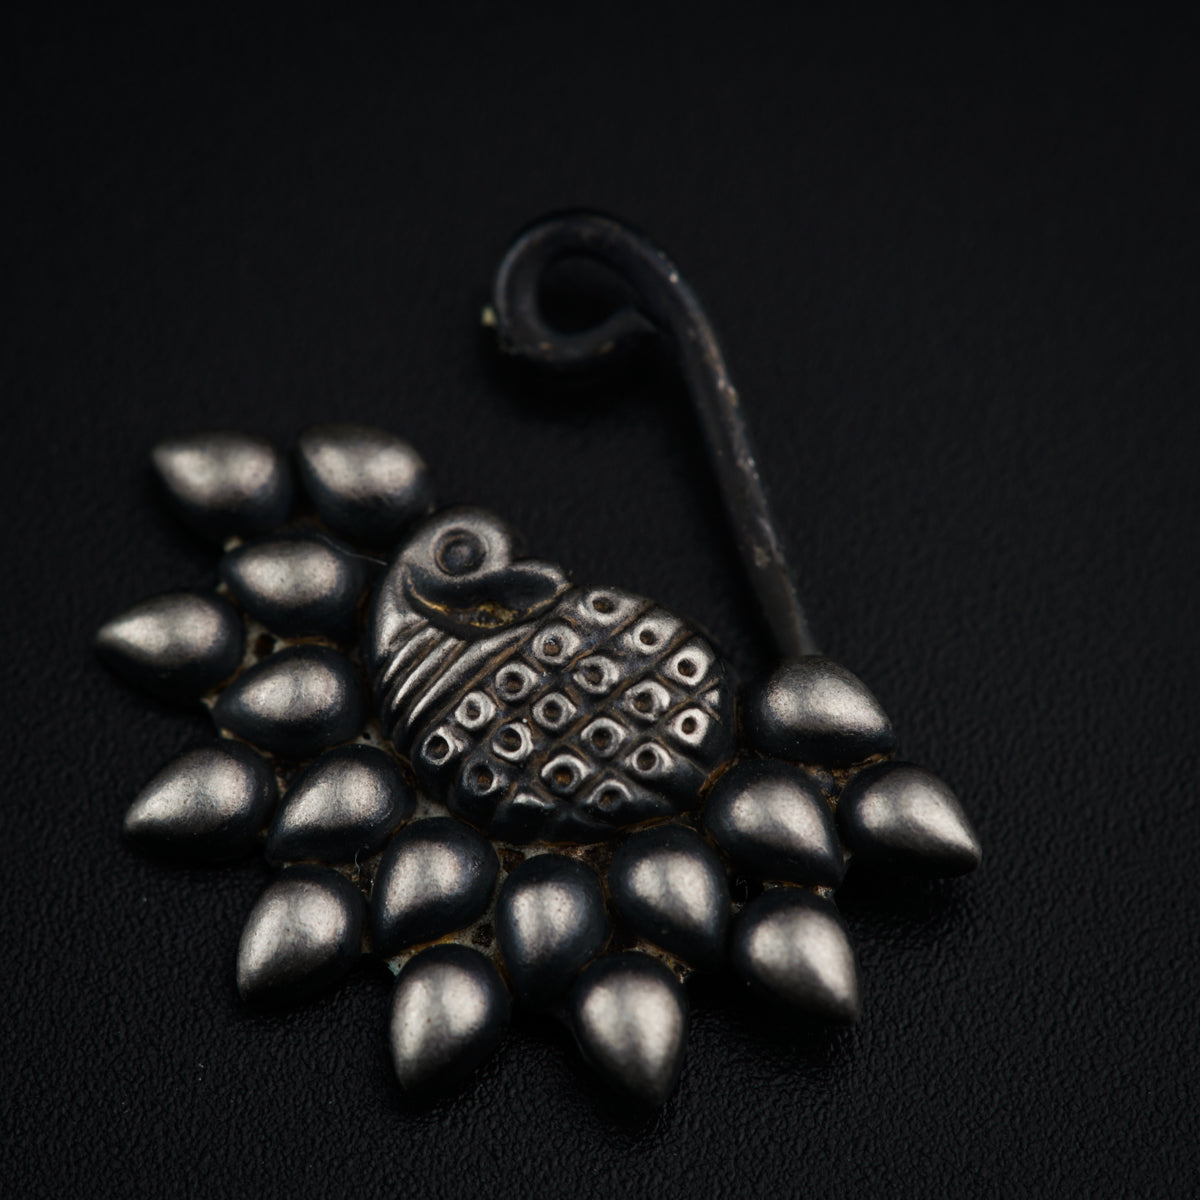 a black and silver brooch with lots of spikes